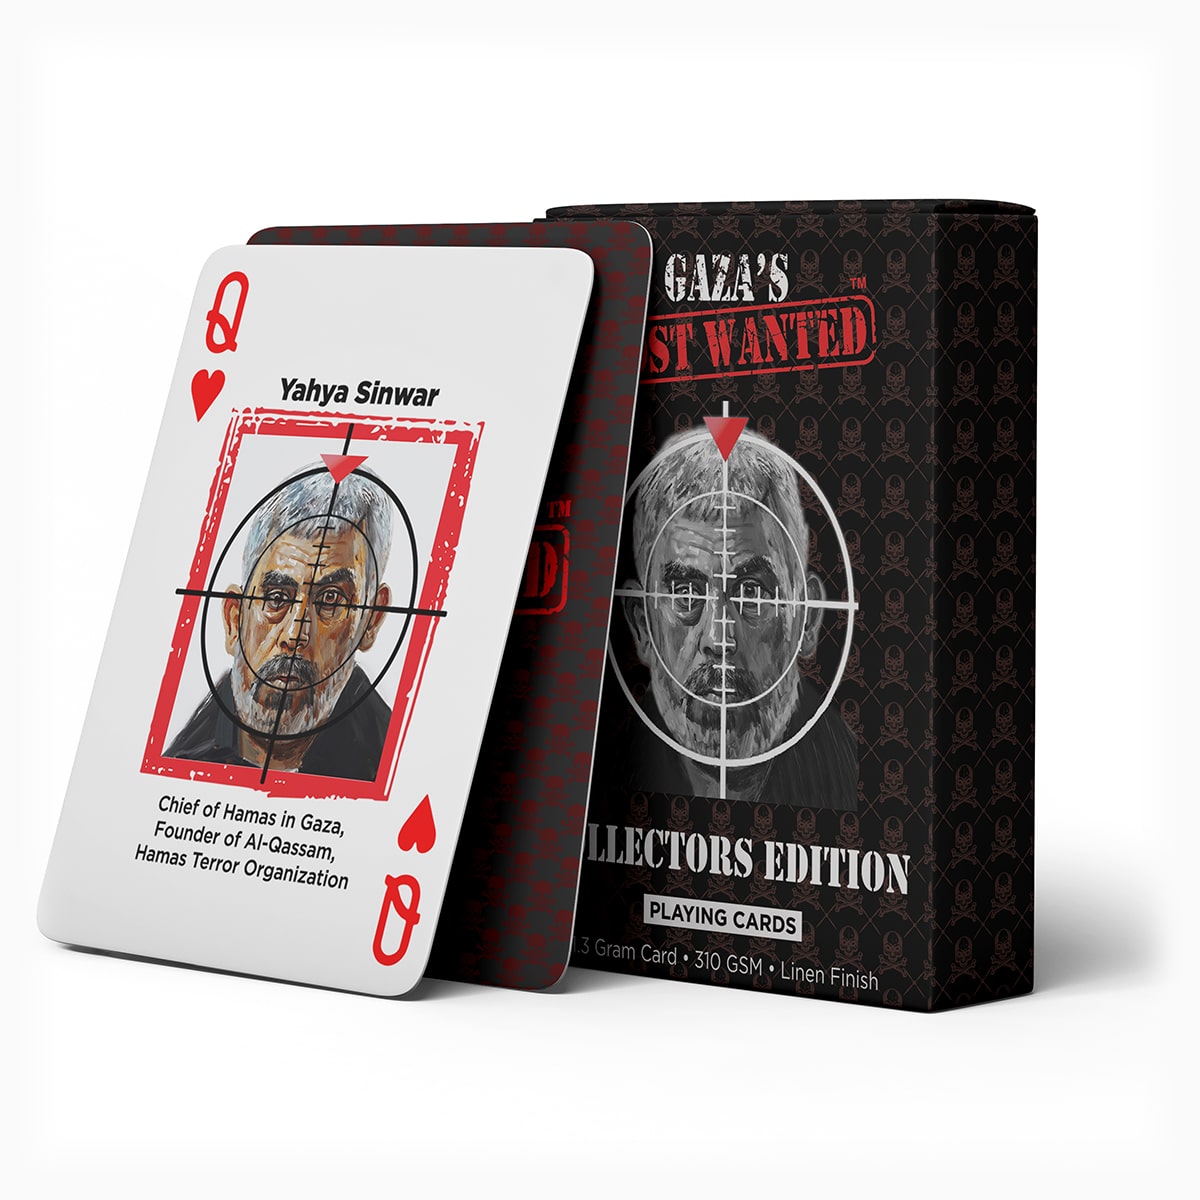 Poker cards with intricate designs, featuring Mossad's intelligence on current Hamas targets in Gaza.